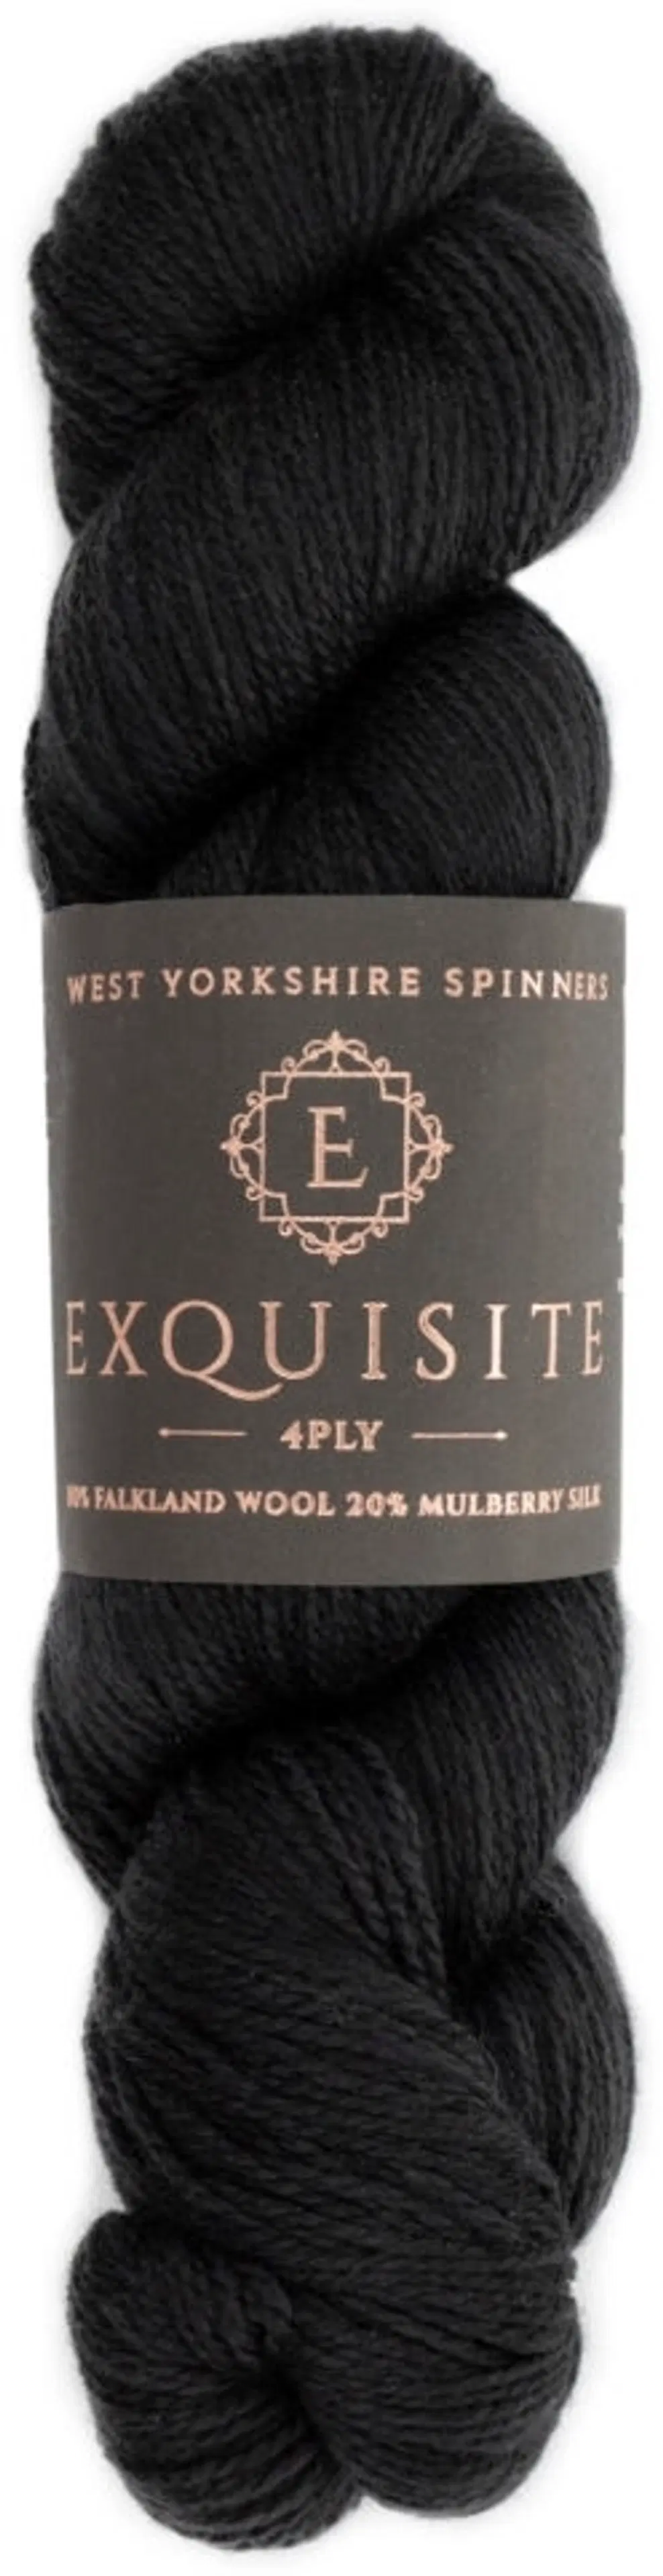 West Yorkshire Spinners lanka Exquisite 4PLY 100g Noir 099